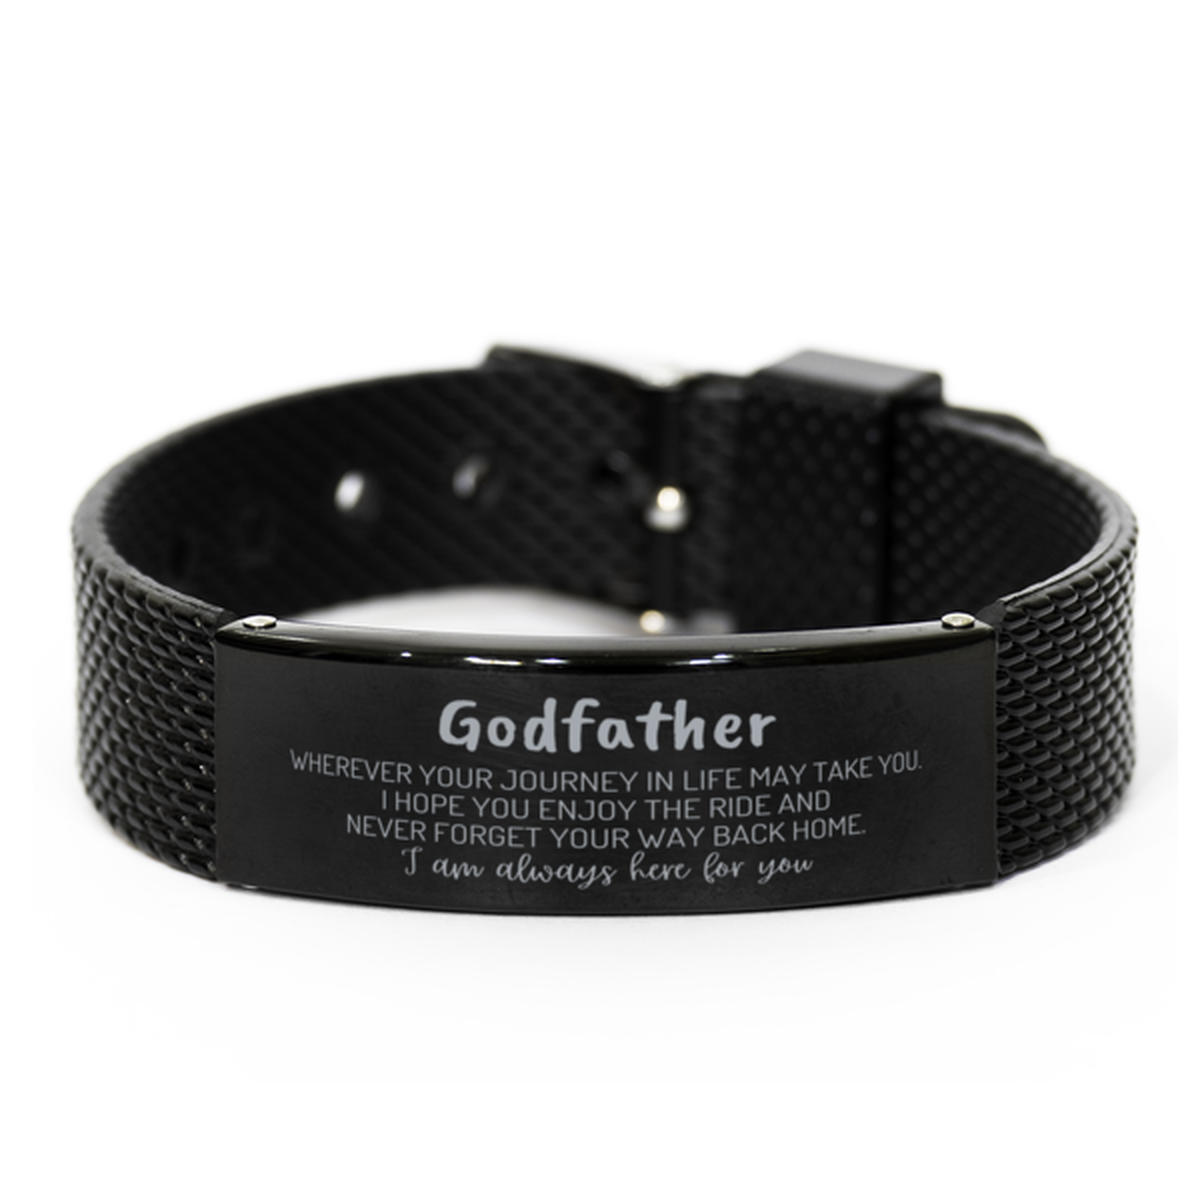 Godfather wherever your journey in life may take you, I am always here for you Godfather Black Shark Mesh Bracelet, Awesome Christmas Gifts For Godfather, Godfather Birthday Gifts for Men Women Family Loved One